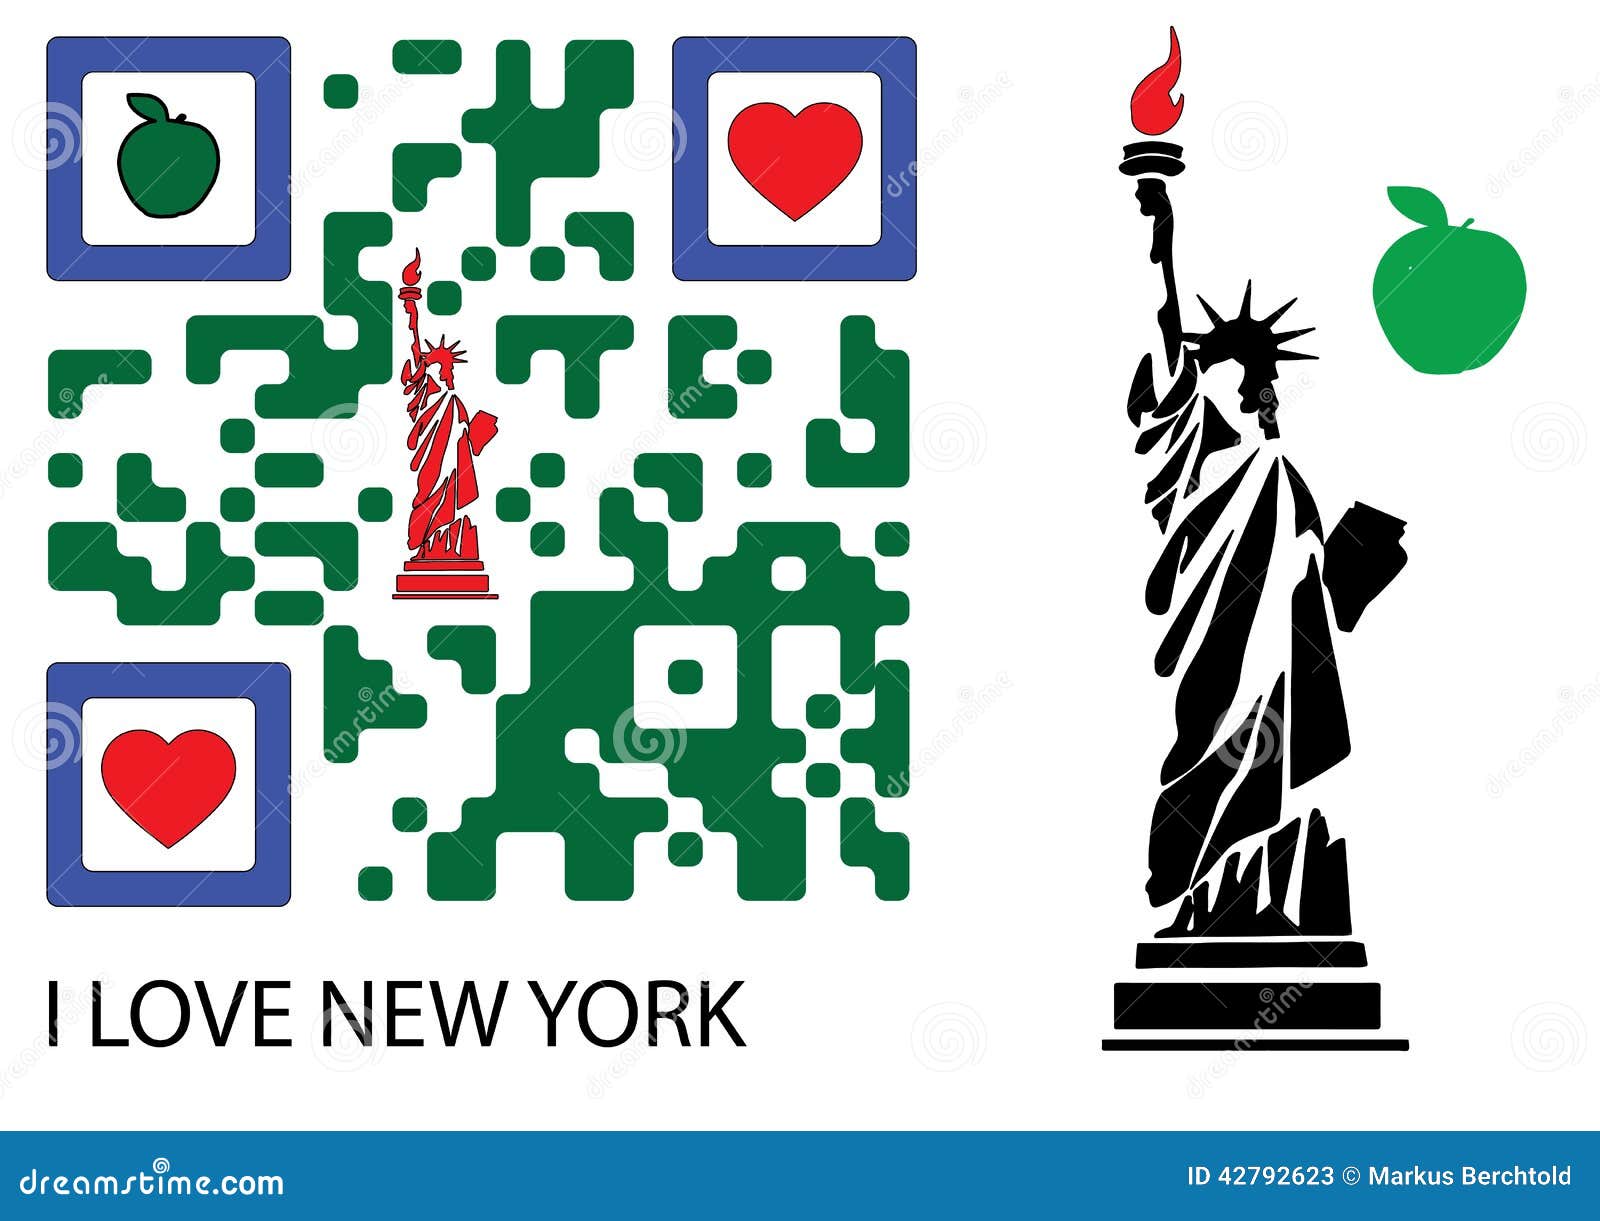 Download Statue Of Liberty And I Love New York QR Code Stock Vector ...